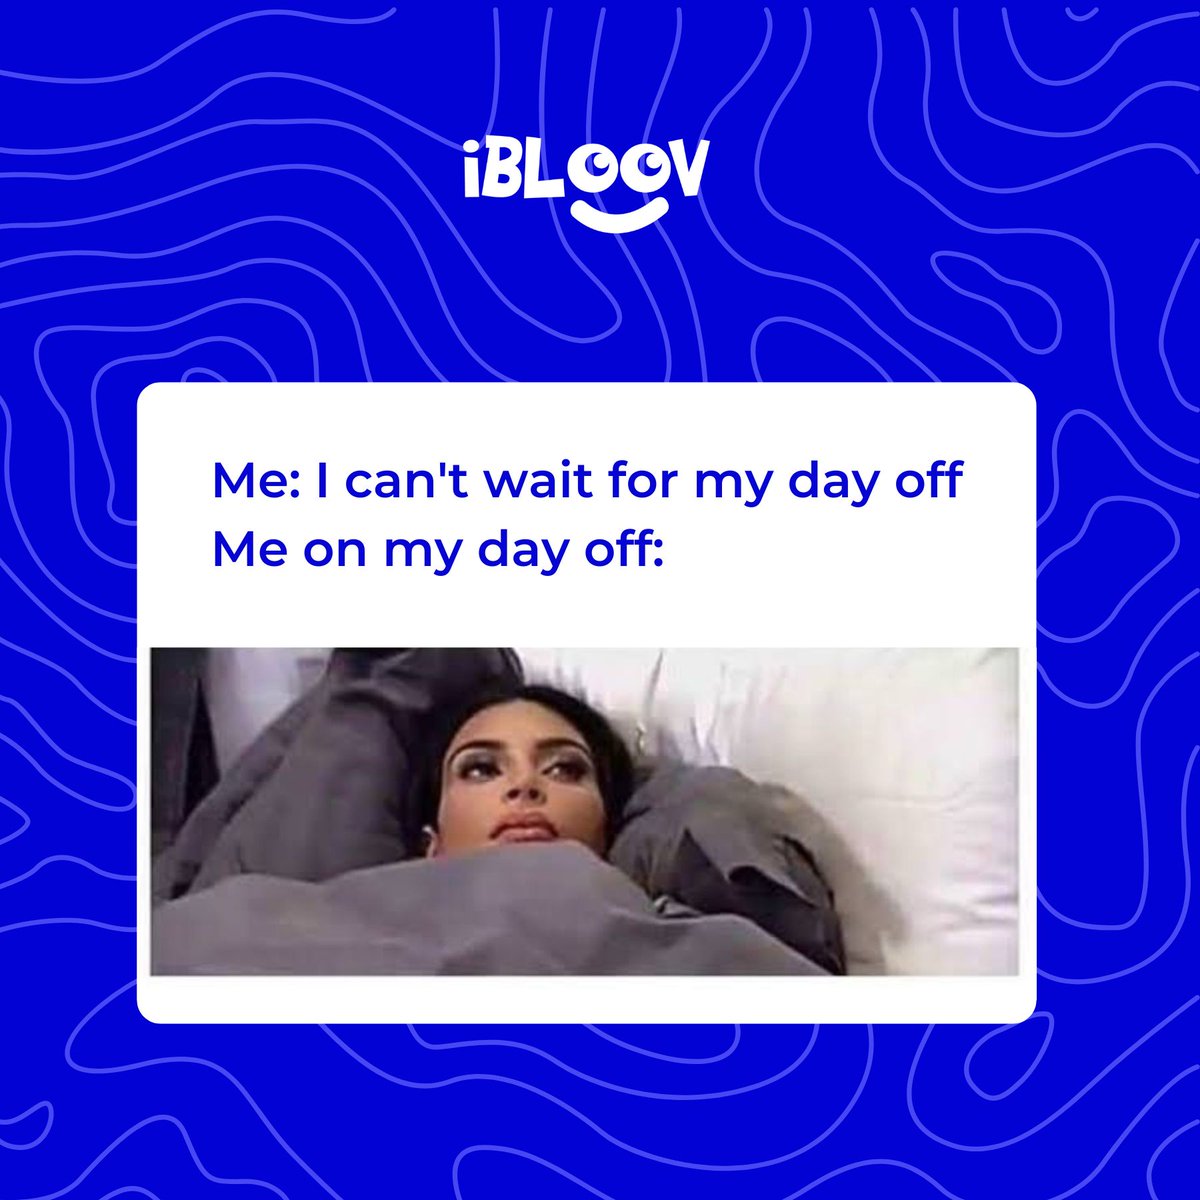 Most people have nothing to do on their day offs. It's just them, their couch, and an overwhelming sense of boredom.

That's why Bloovers rely on iBloov to do the job. You too can do the same, find a place to go and have fun!

#DayOffDilemma #BoredomStrikes